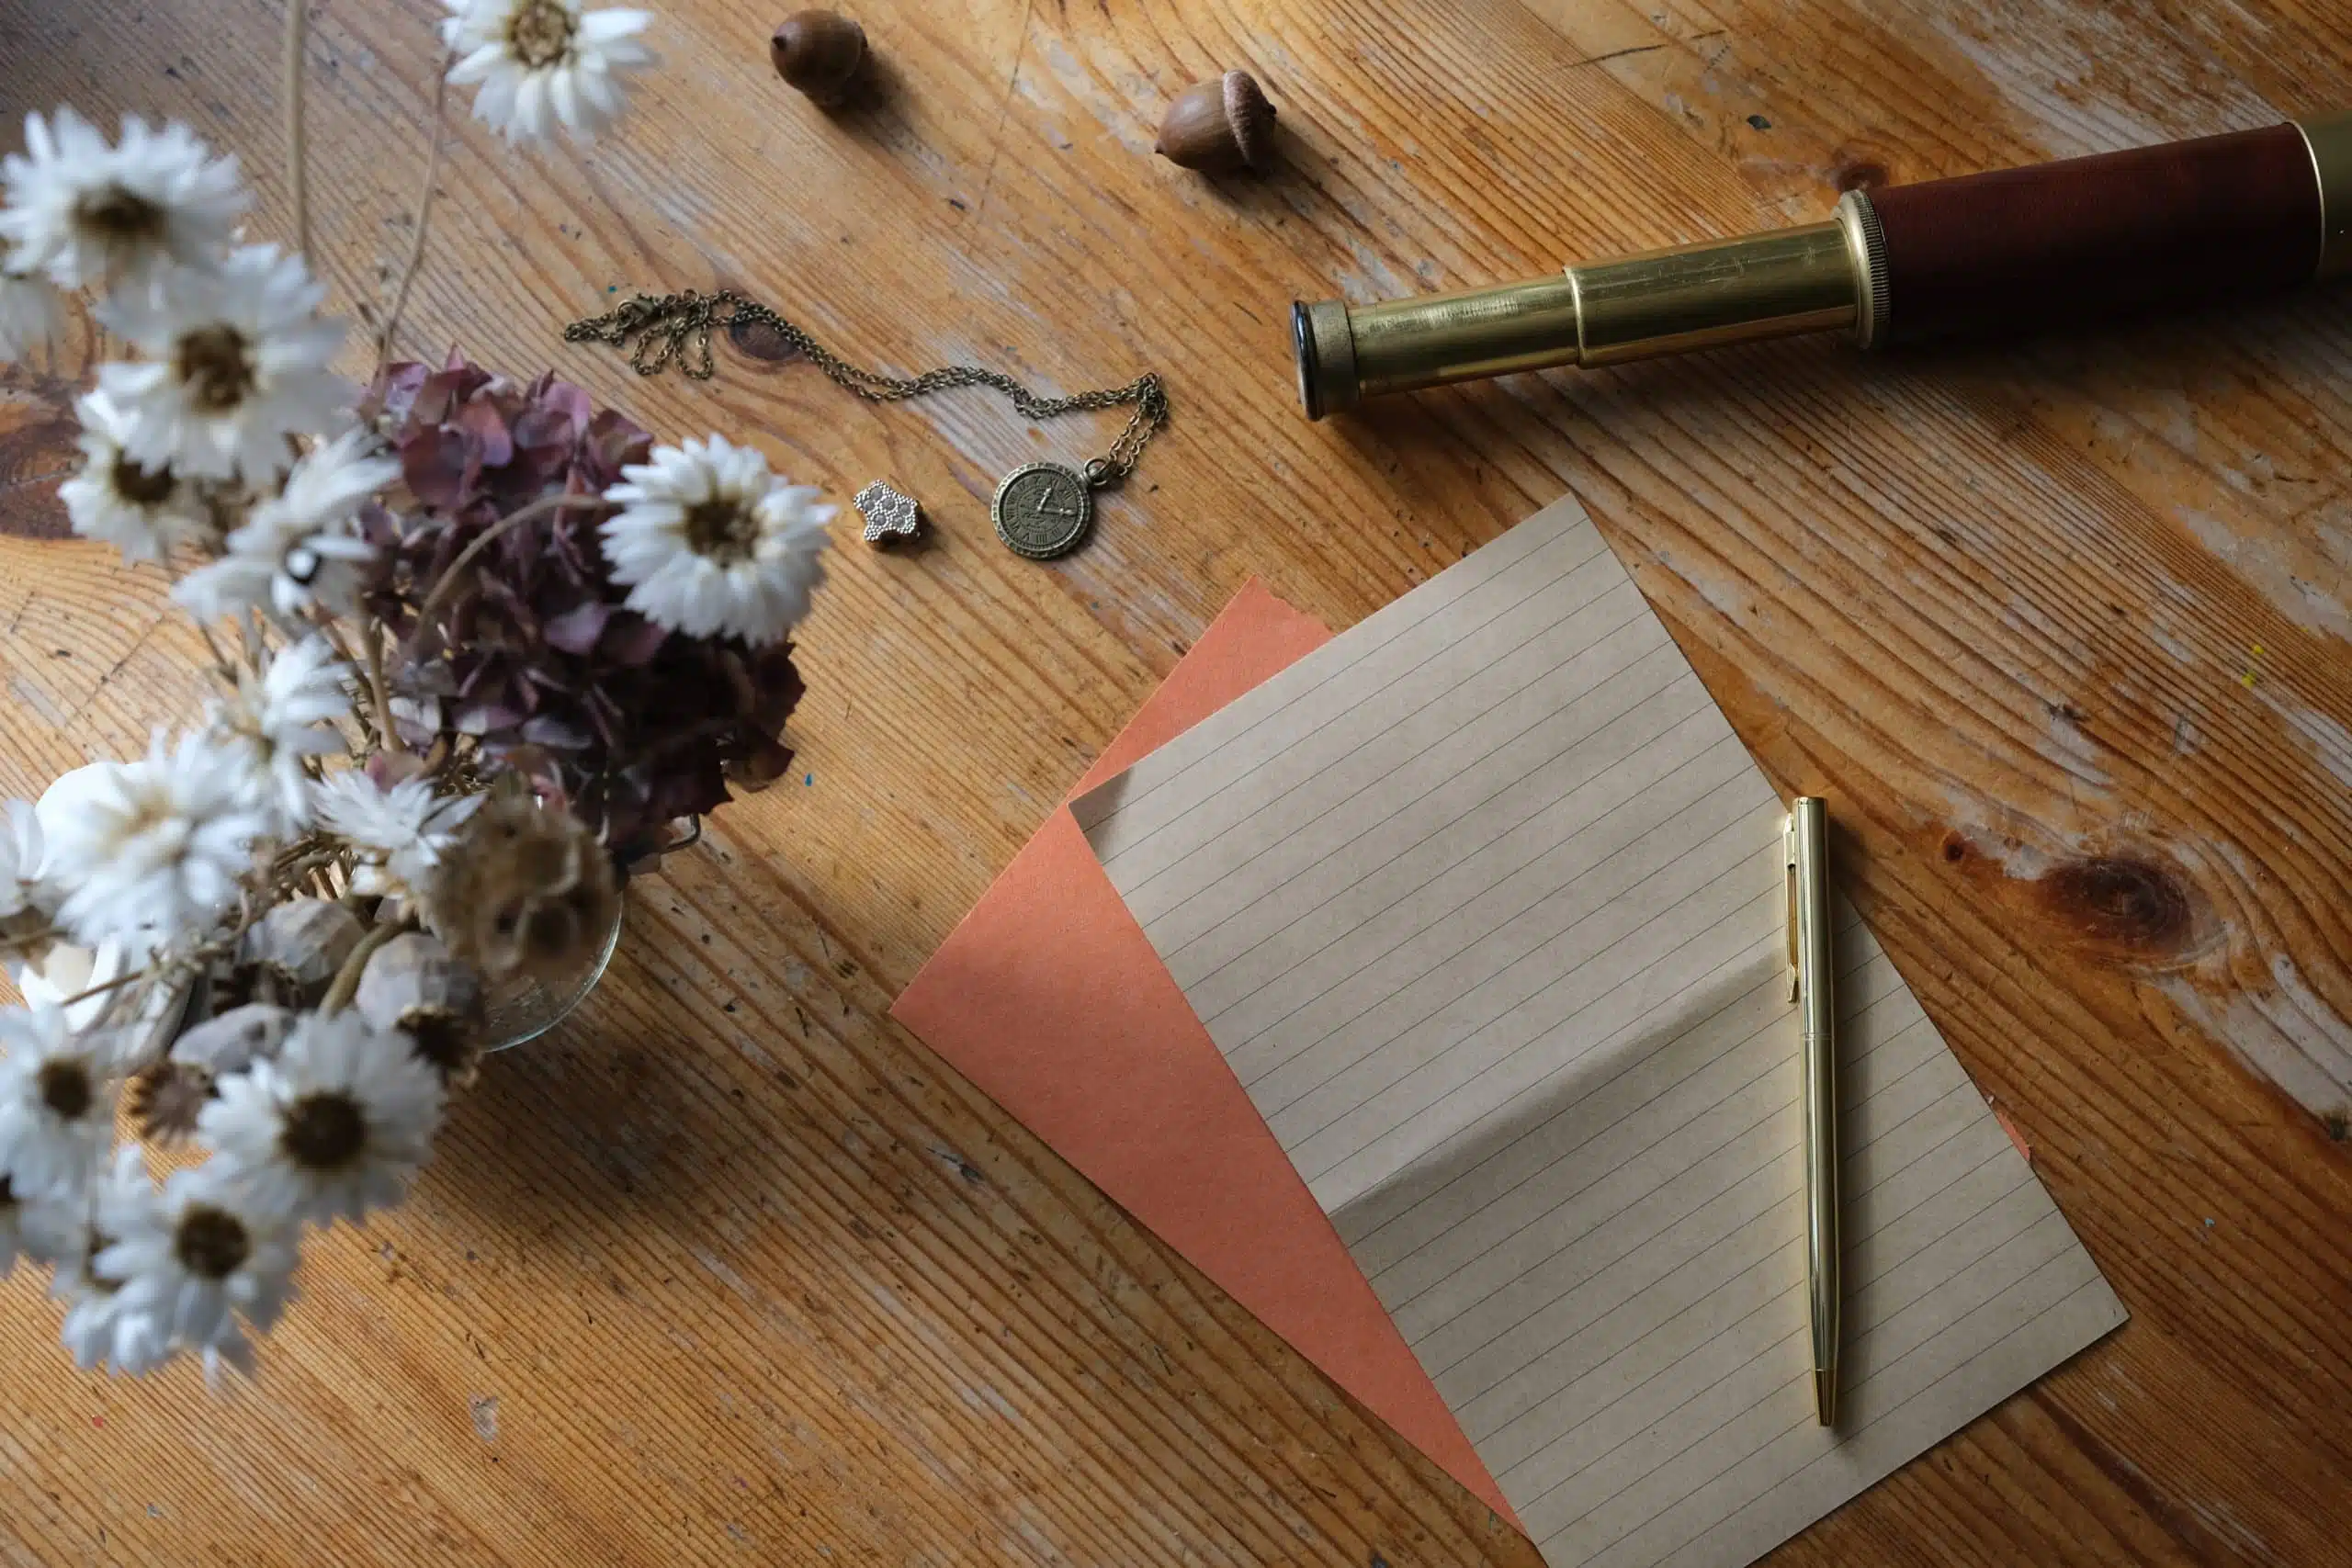 Vintage paper, pen and a vase of dried flowers on wooden desk.